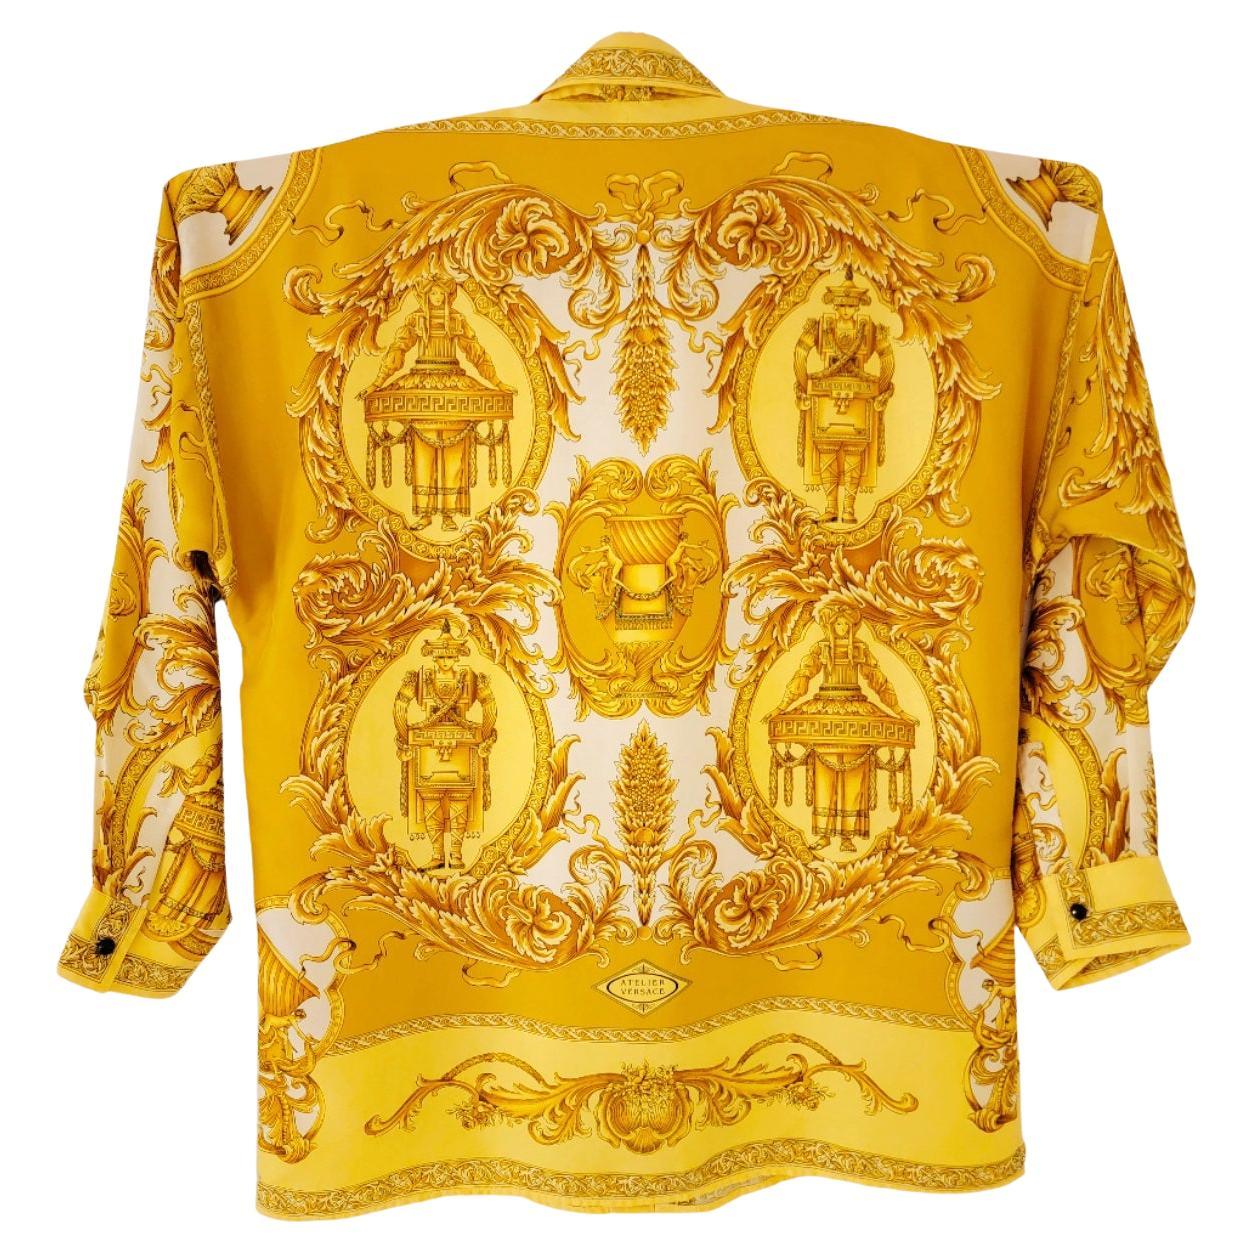 GIANNI VERSACE silk shirt Florida Miami & Baroque size 48 from S/S 1993